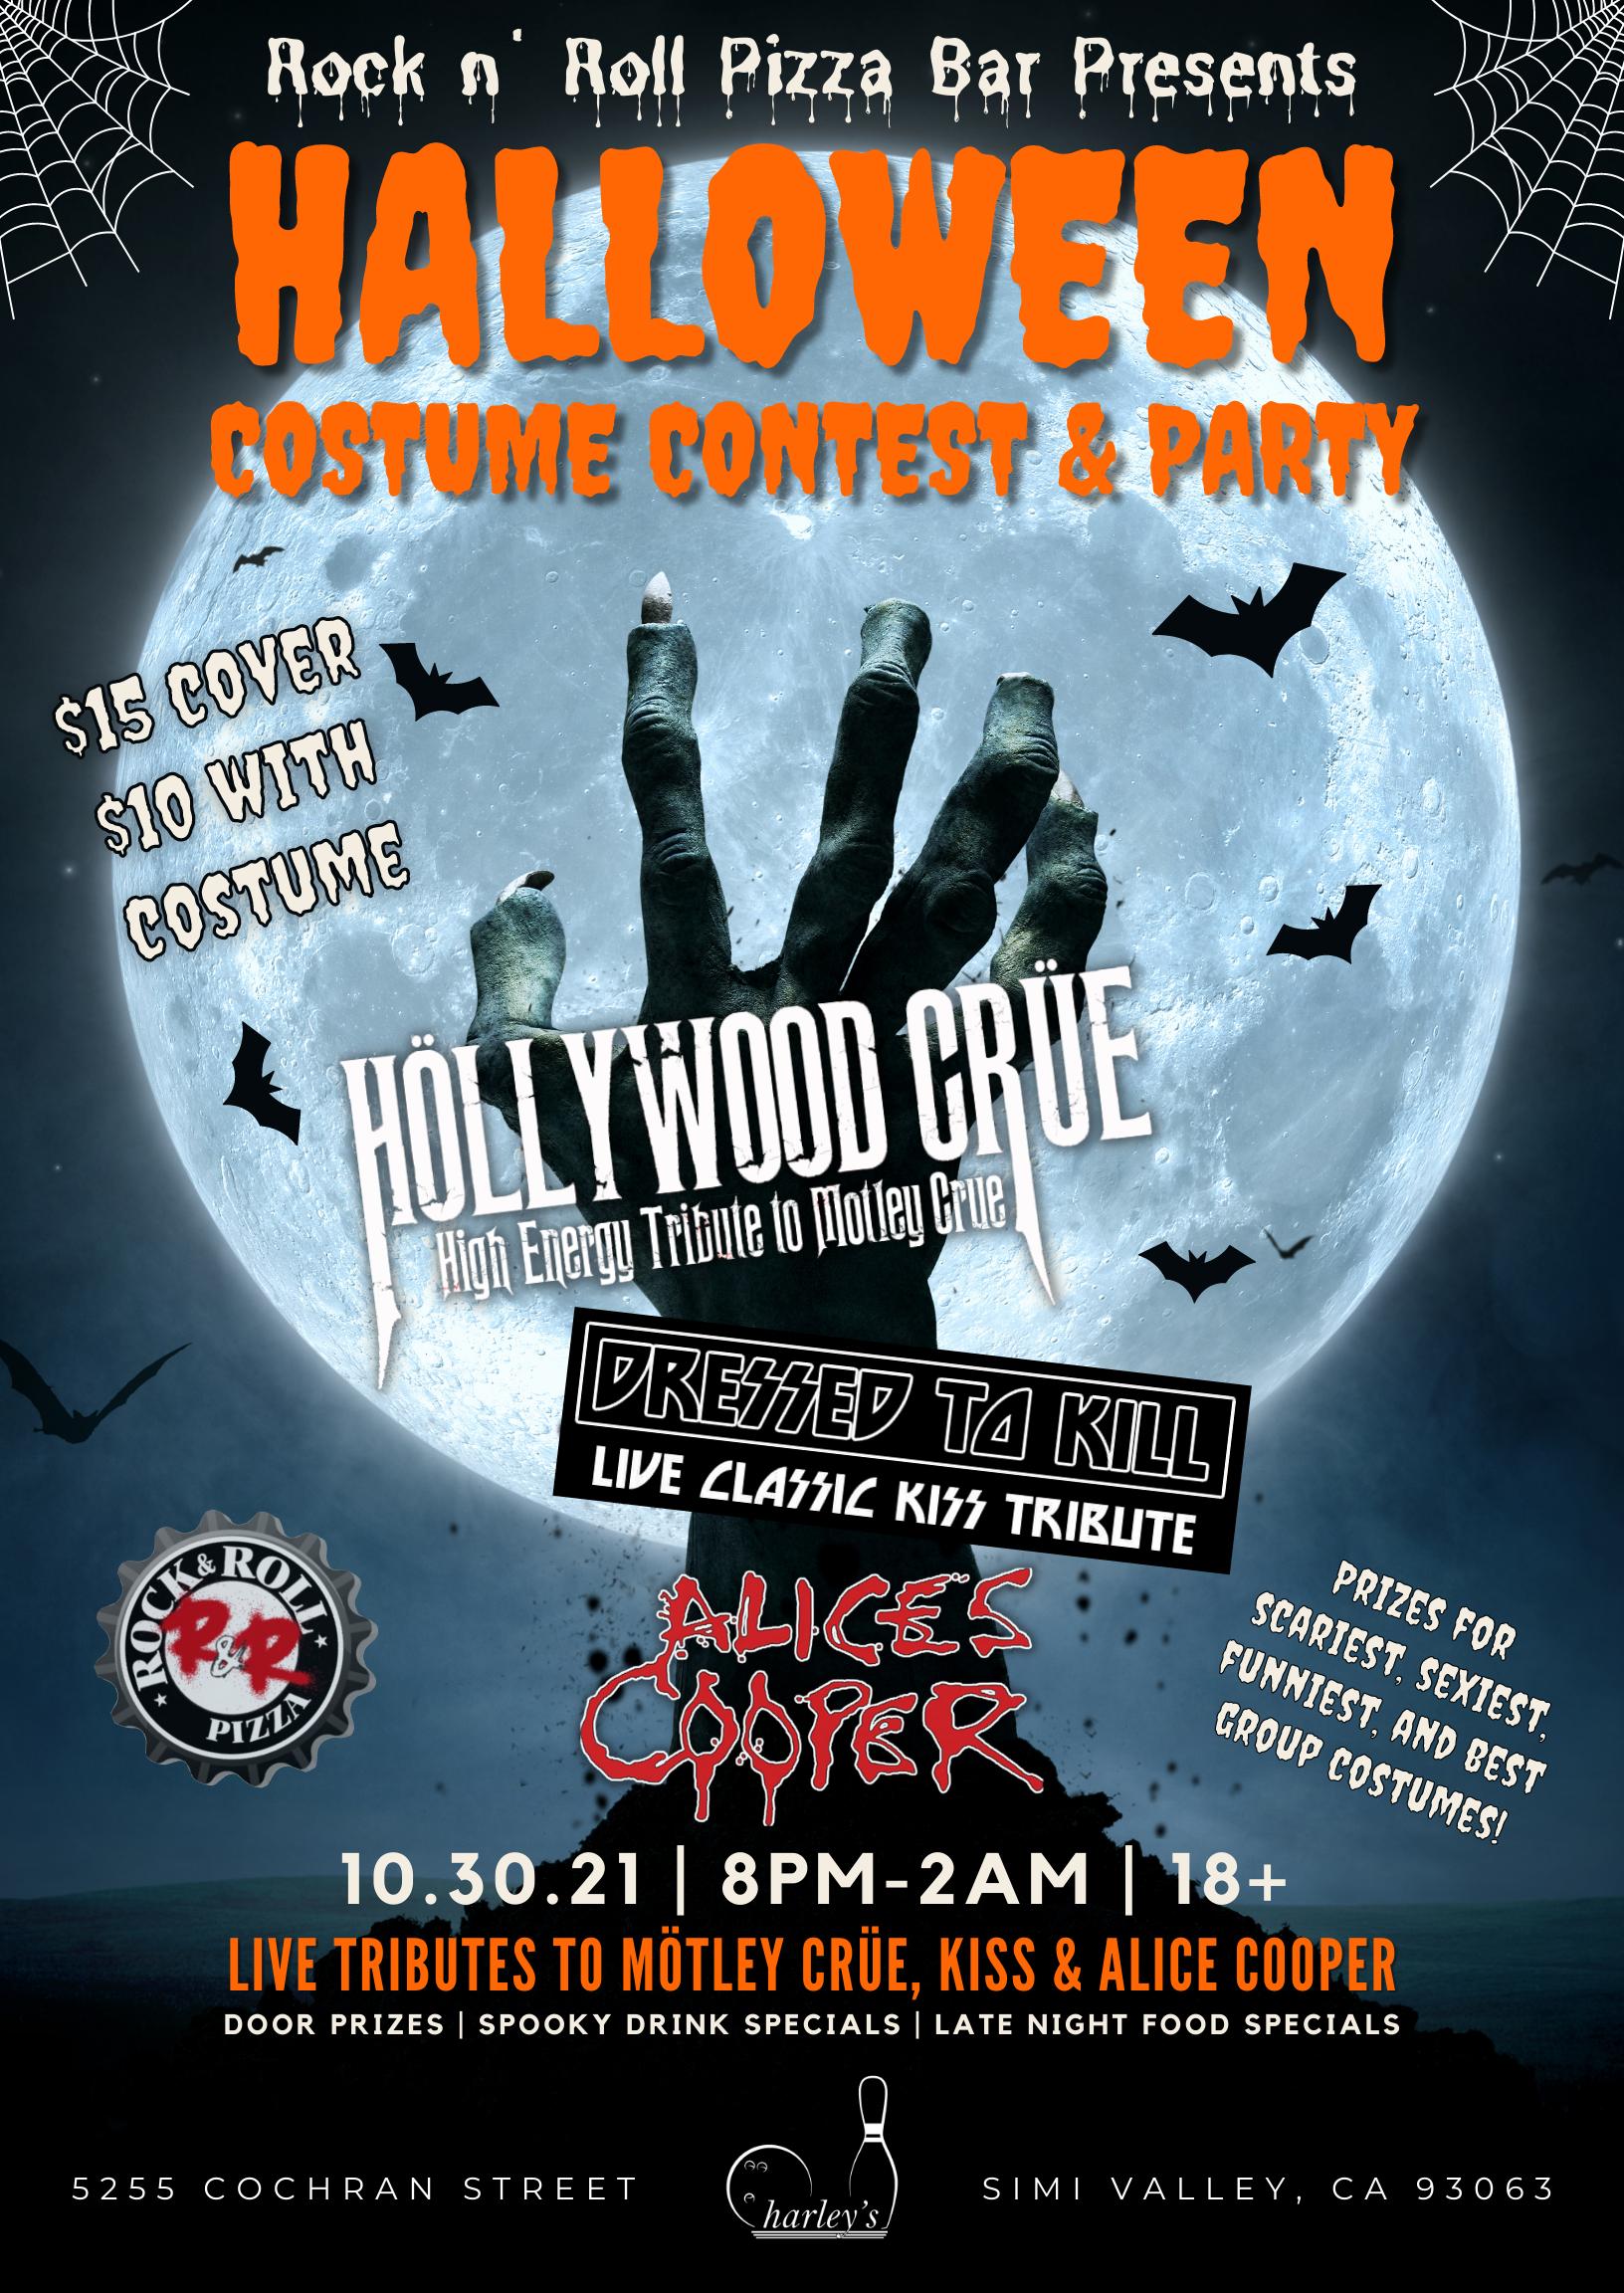 Halloween Costume Contest Party with Hollywood Crue, Alices Cooper, and Dressed Kill — harley's Bowl